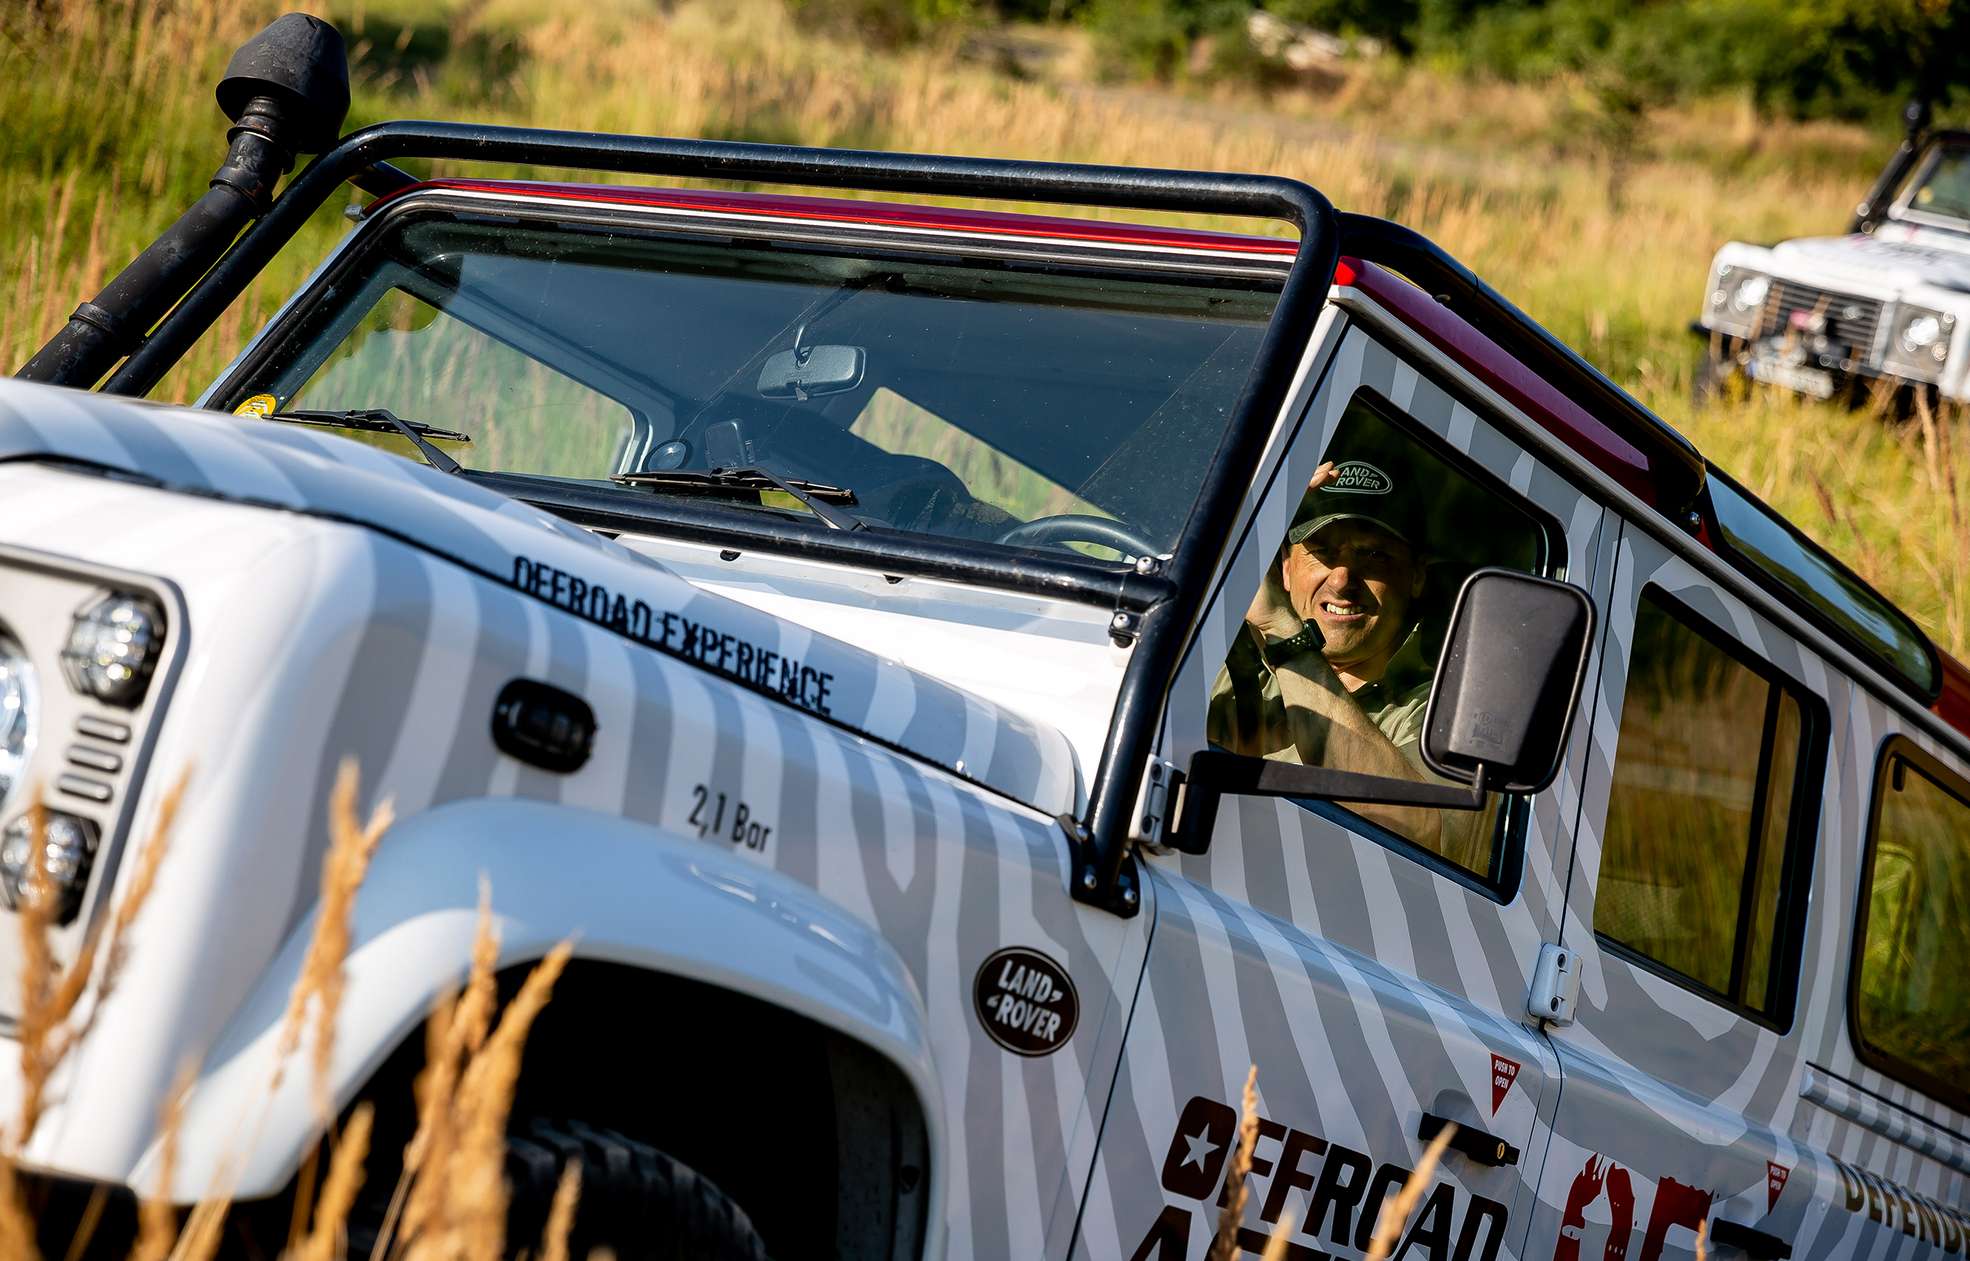 Corporate Events - Offroad Adventures